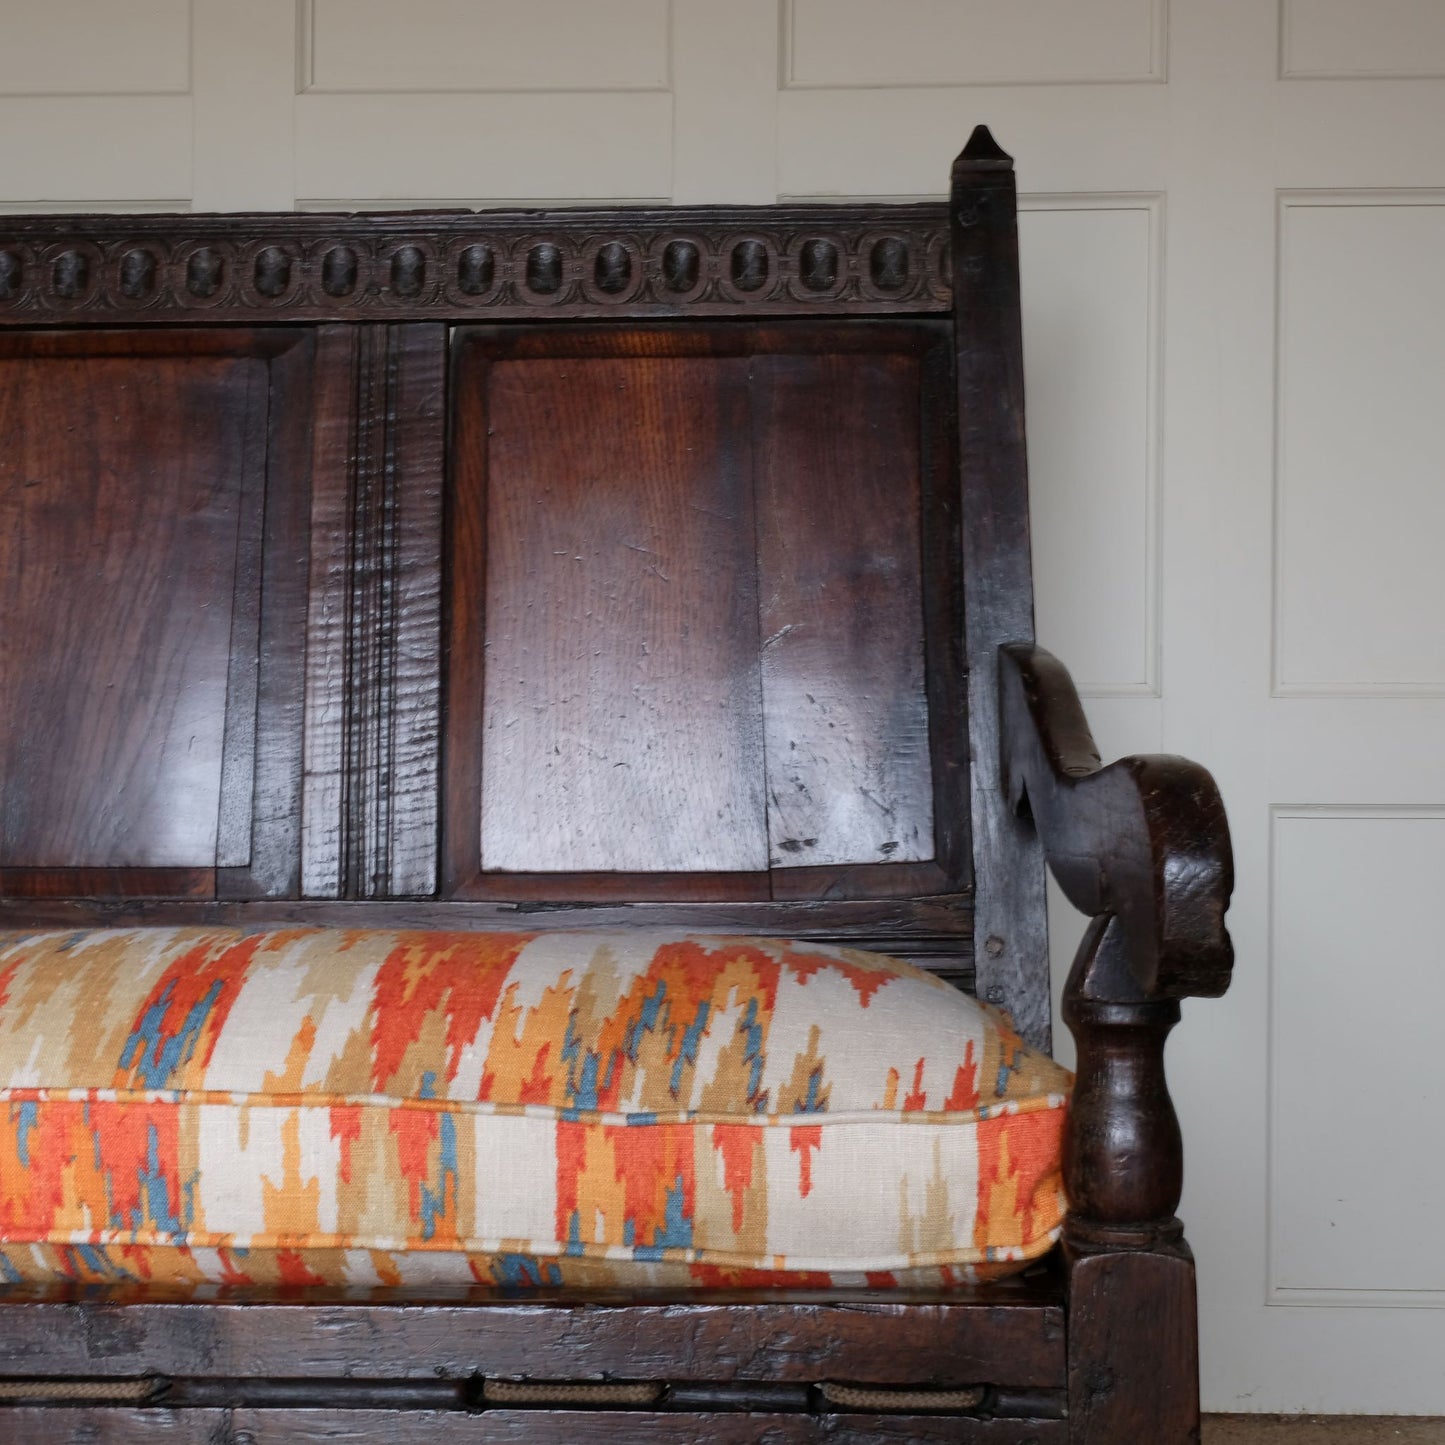 An exquisite 18th century oak settle with a carved back panel on turned legs with a barley twist front stretcher. In good, sturdy condition with a really beautiful, rich patina. The seat has been re-corded, and a new feather cushion made for it, upholstered in "Thika" by Jim Thompson, sourced from Haines Collection. Below this cushion sits a slim pad which has been made to protect the upholstery from wear from the cording.